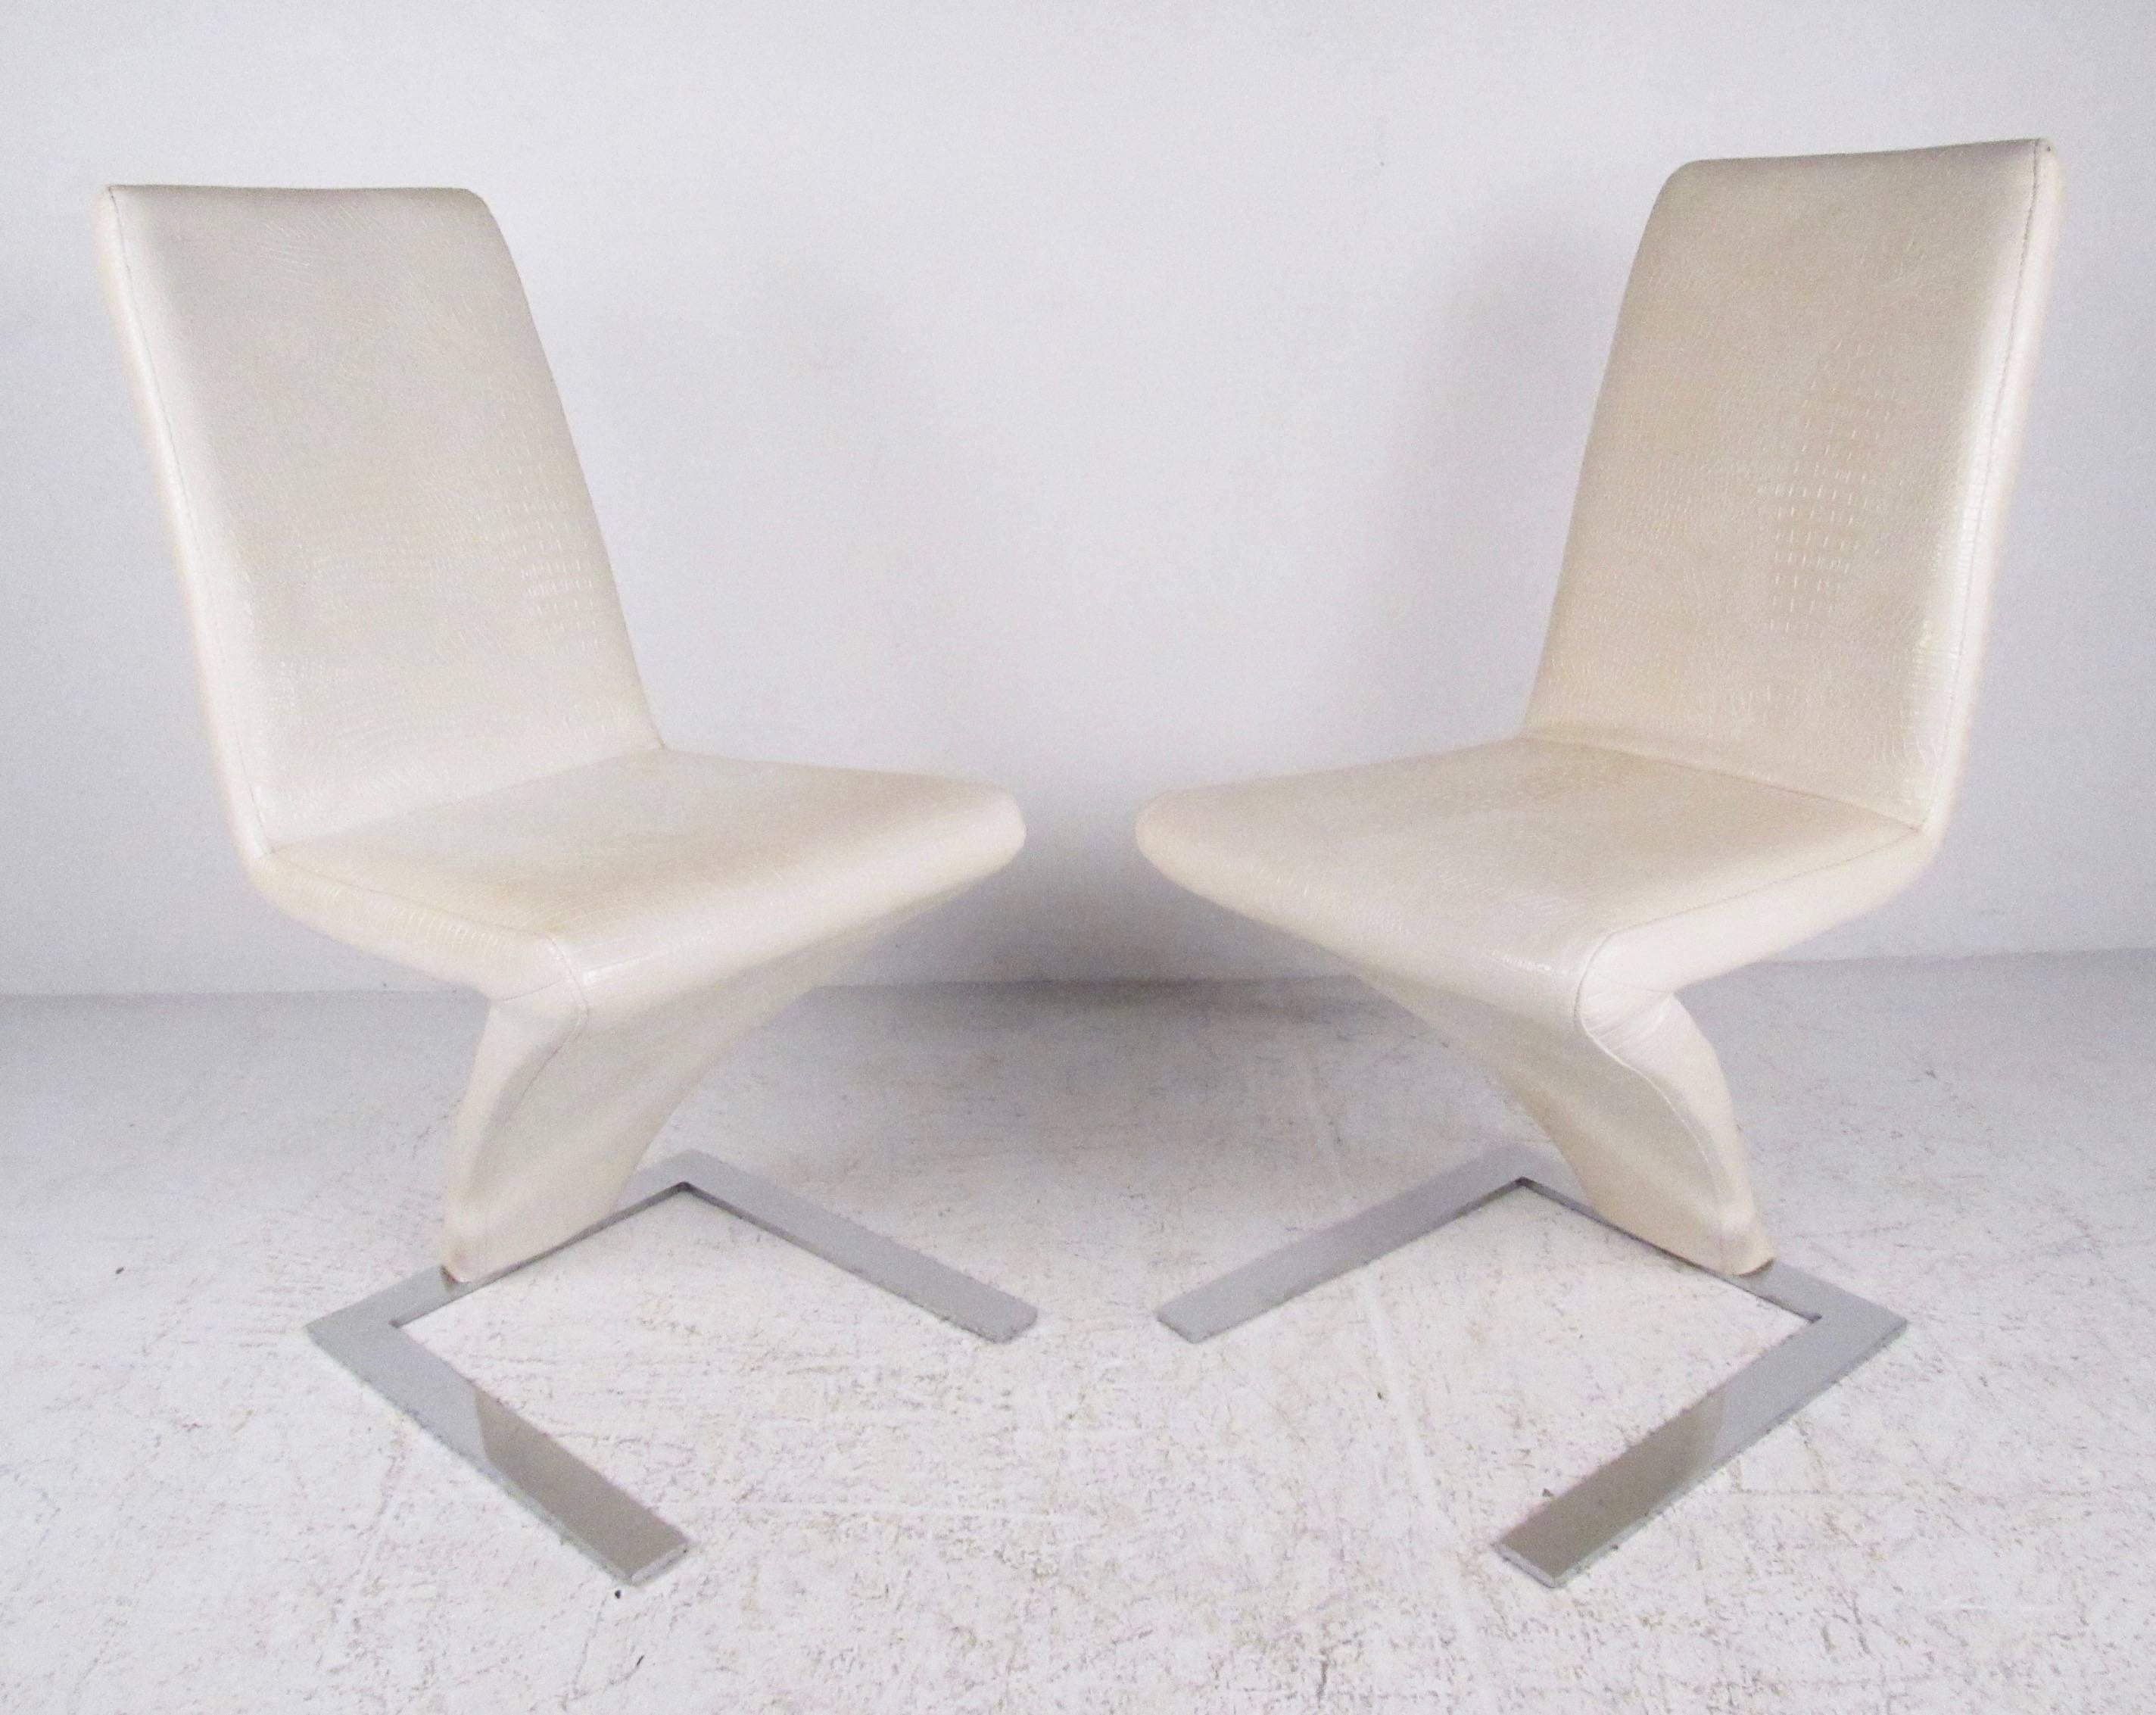 This stylish pair of contemporary modern side chairs feature faux skin upholstery, sturdy cantilever base, and comfortable high back design in the style of Verner Panton. Please confirm item location (NY or NJ).